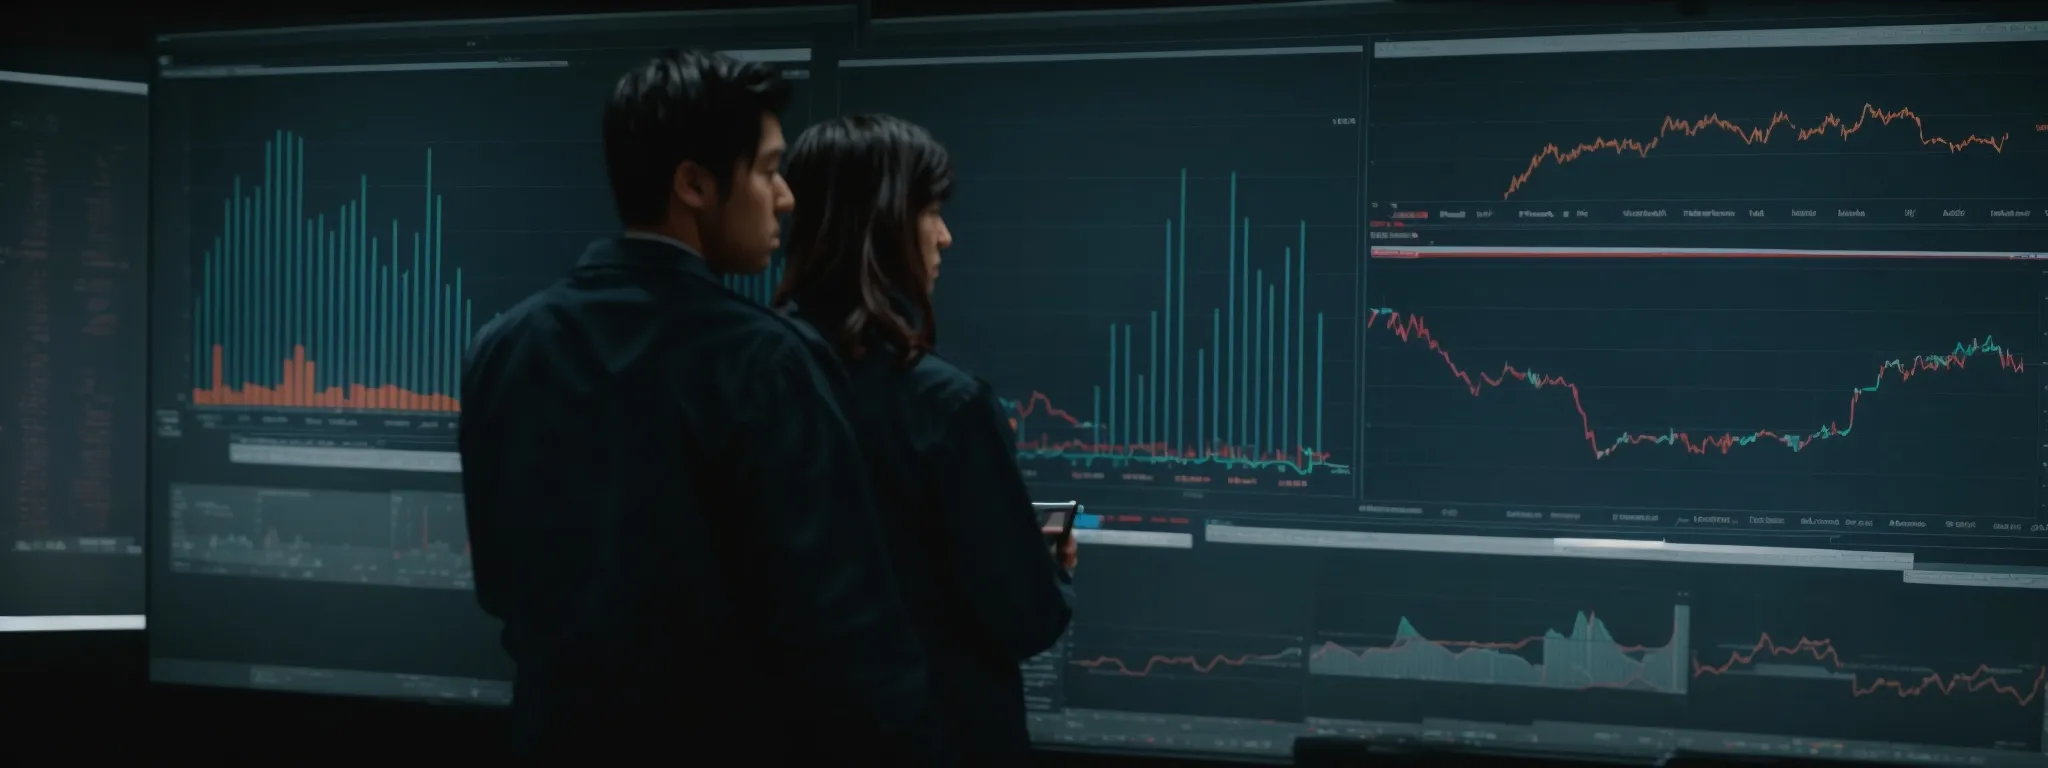 two professionals discuss over a large screen showing website analytics graphs and performance metrics.